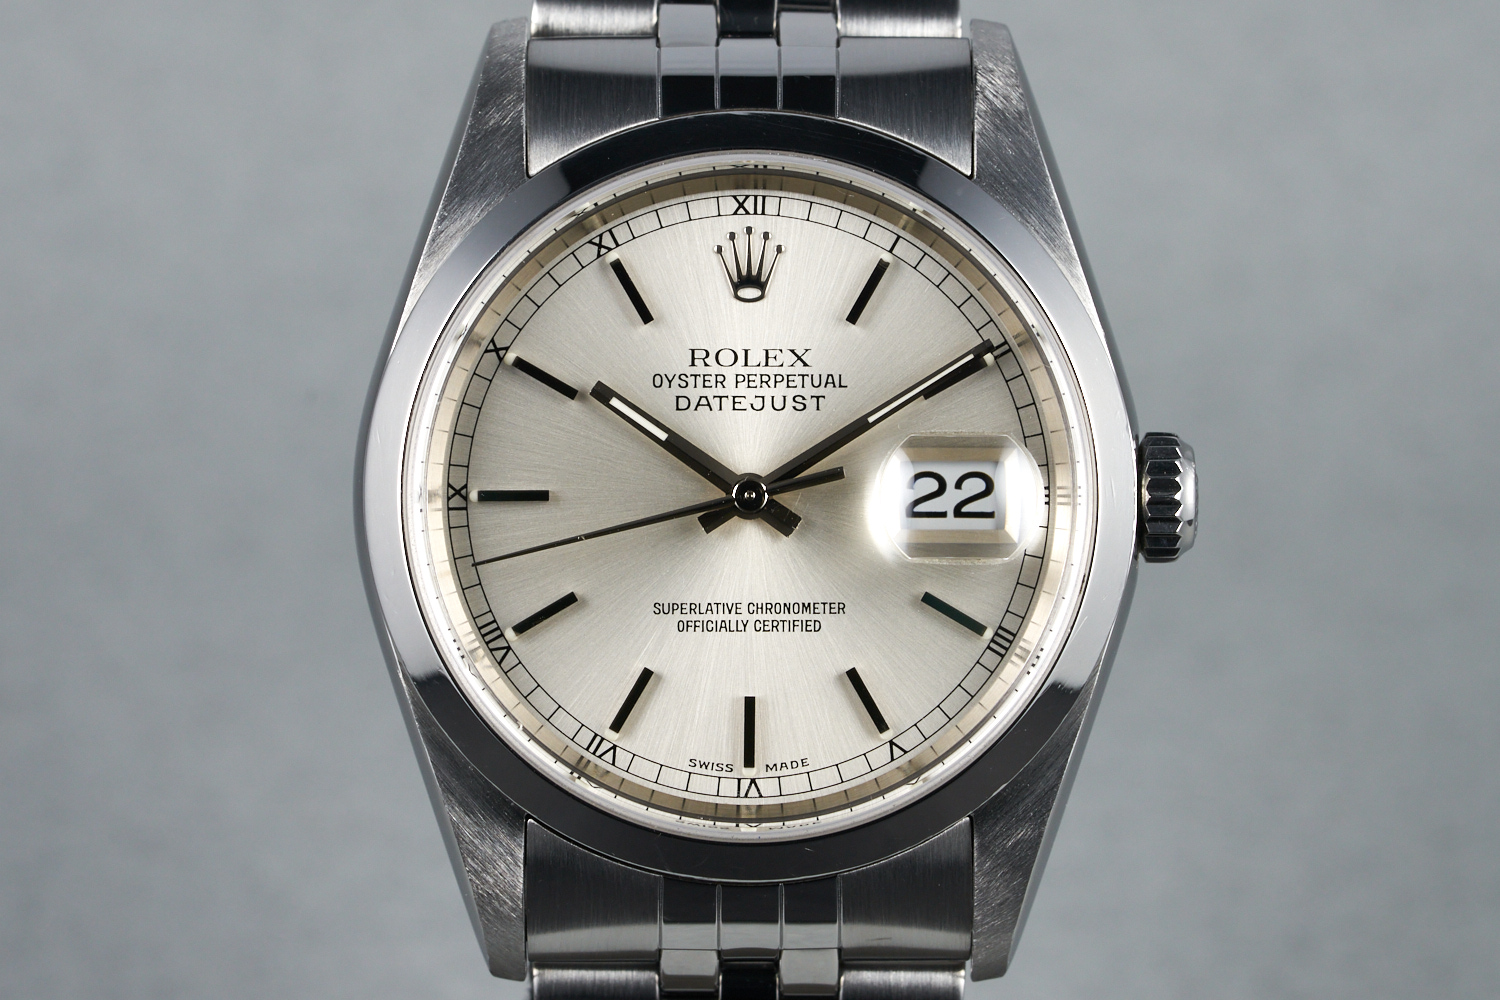 Rolex Datejust (16200) Price Guide and 